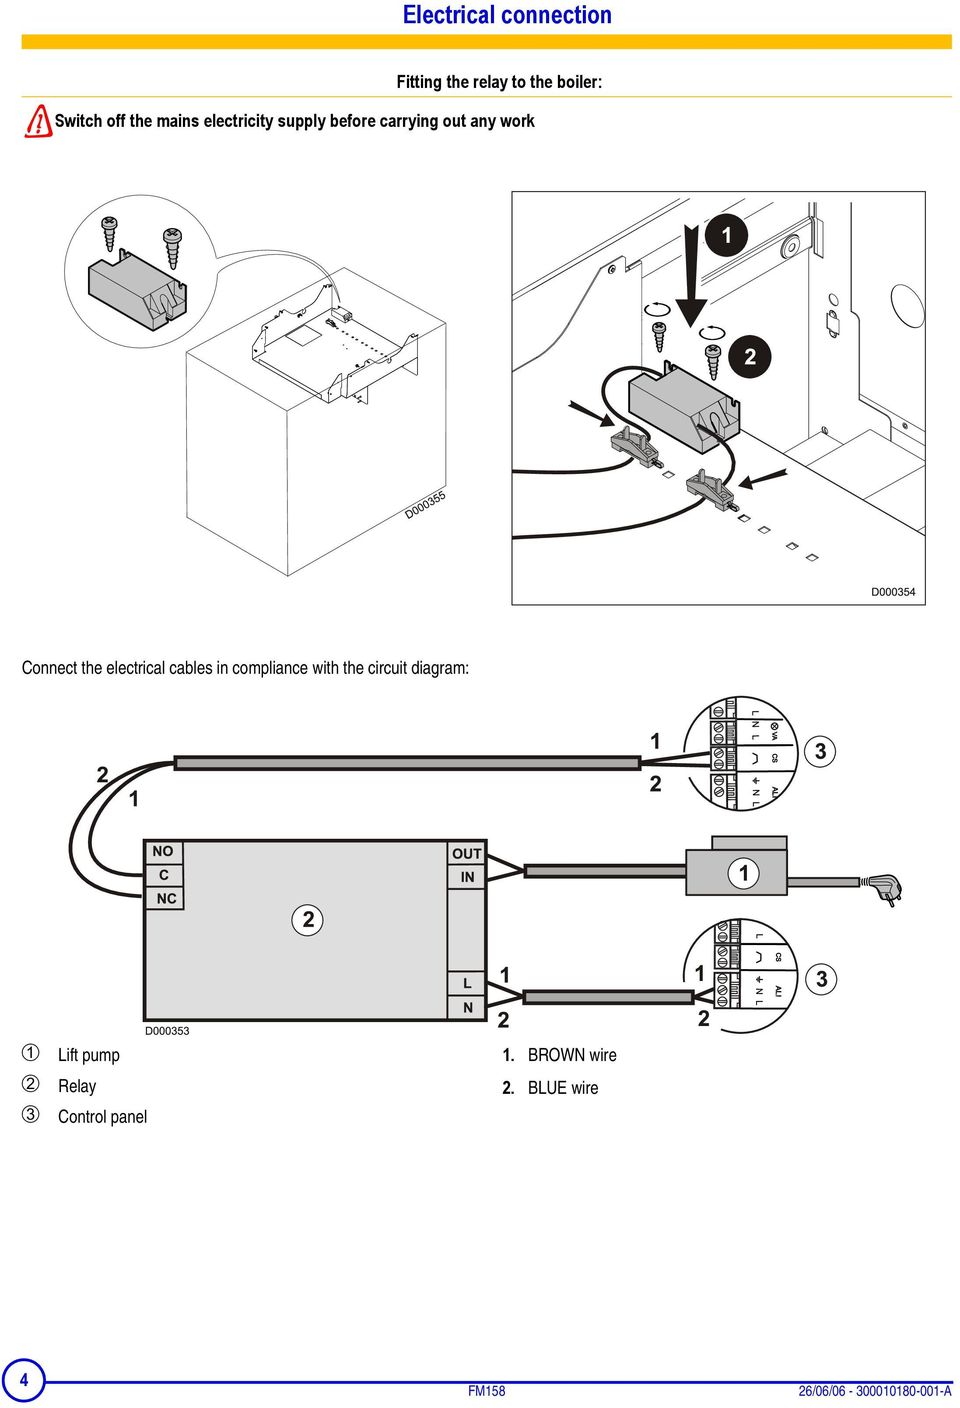 electrical cables in compliance with the circuit diagram: Lift pump